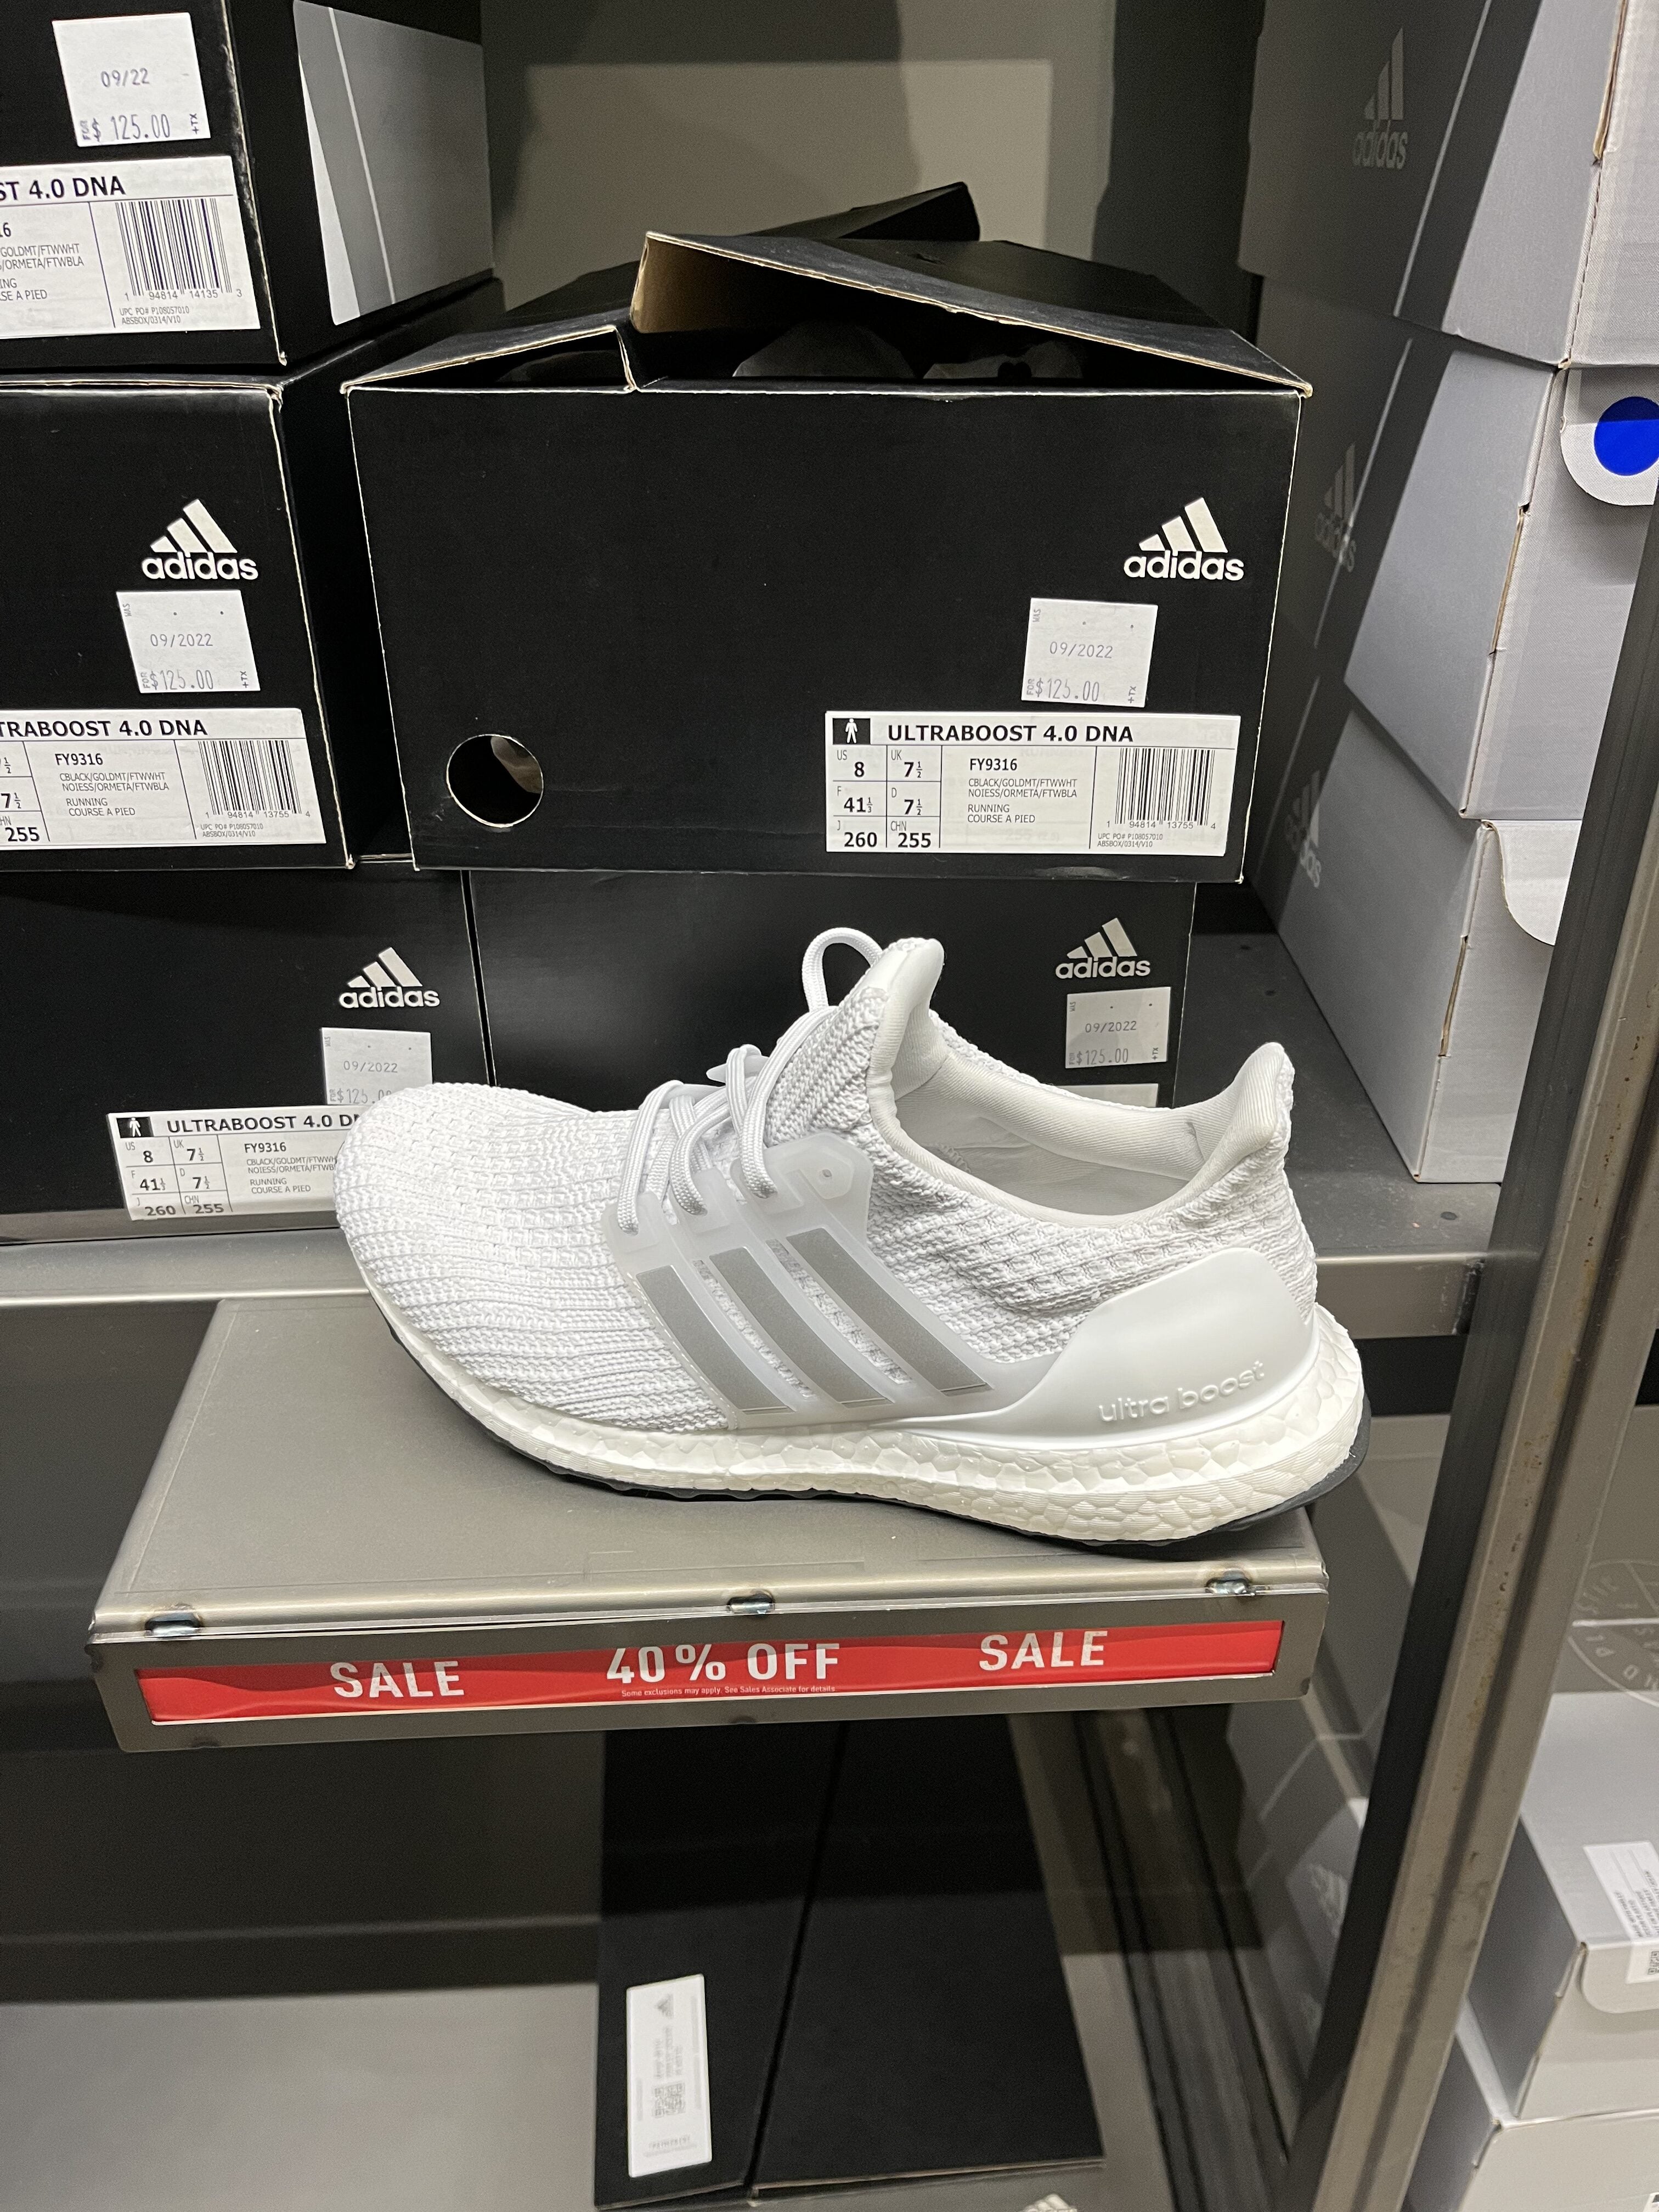 adidas] Adidas Outlet (Heartland Mississauga) - off including past season Ultraboosts -> $75) - RedFlagDeals.com Forums